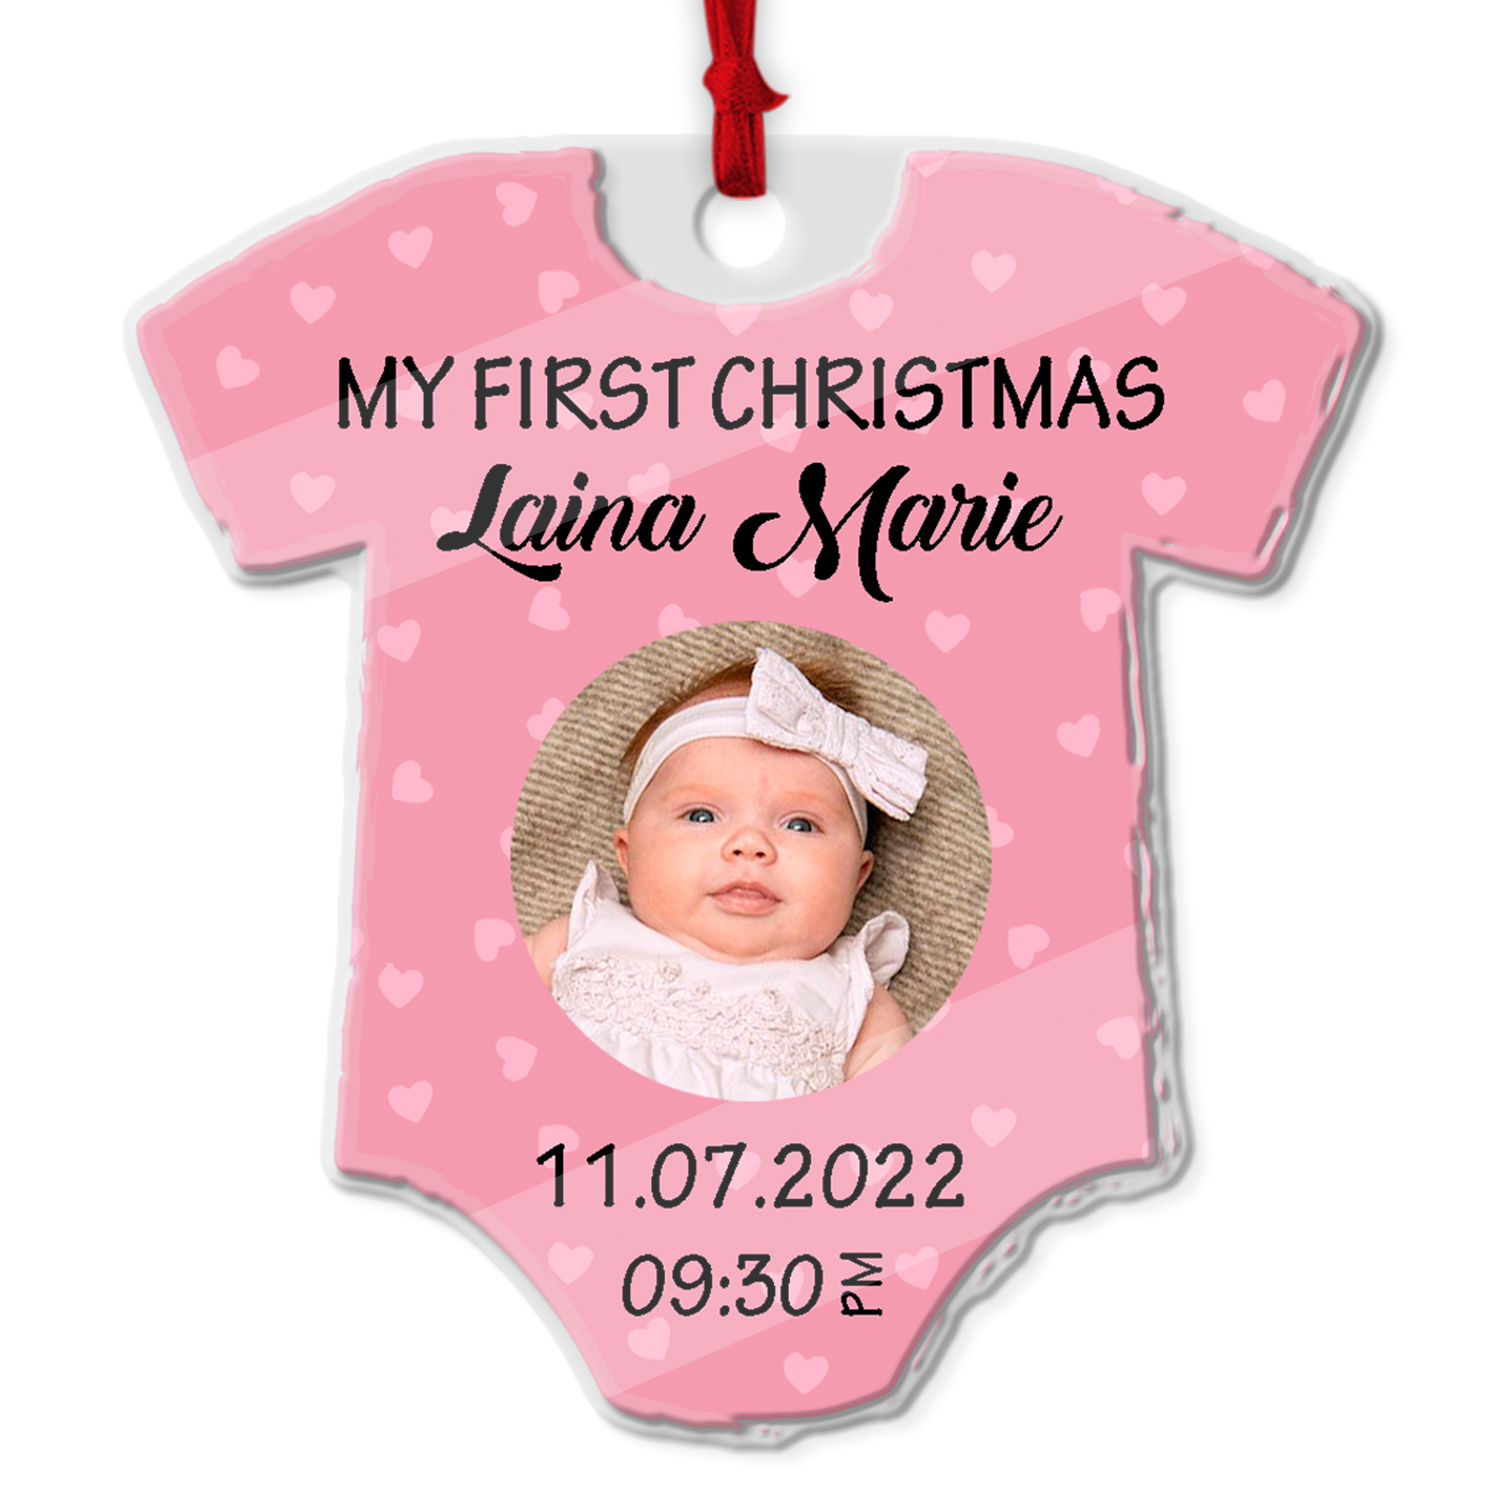 Personalized Name And Text, Ornament For Baby, Baby Girl's First Christmas, Christmas Shirt Ornament, Christmas Shape Ornament 2 Sides